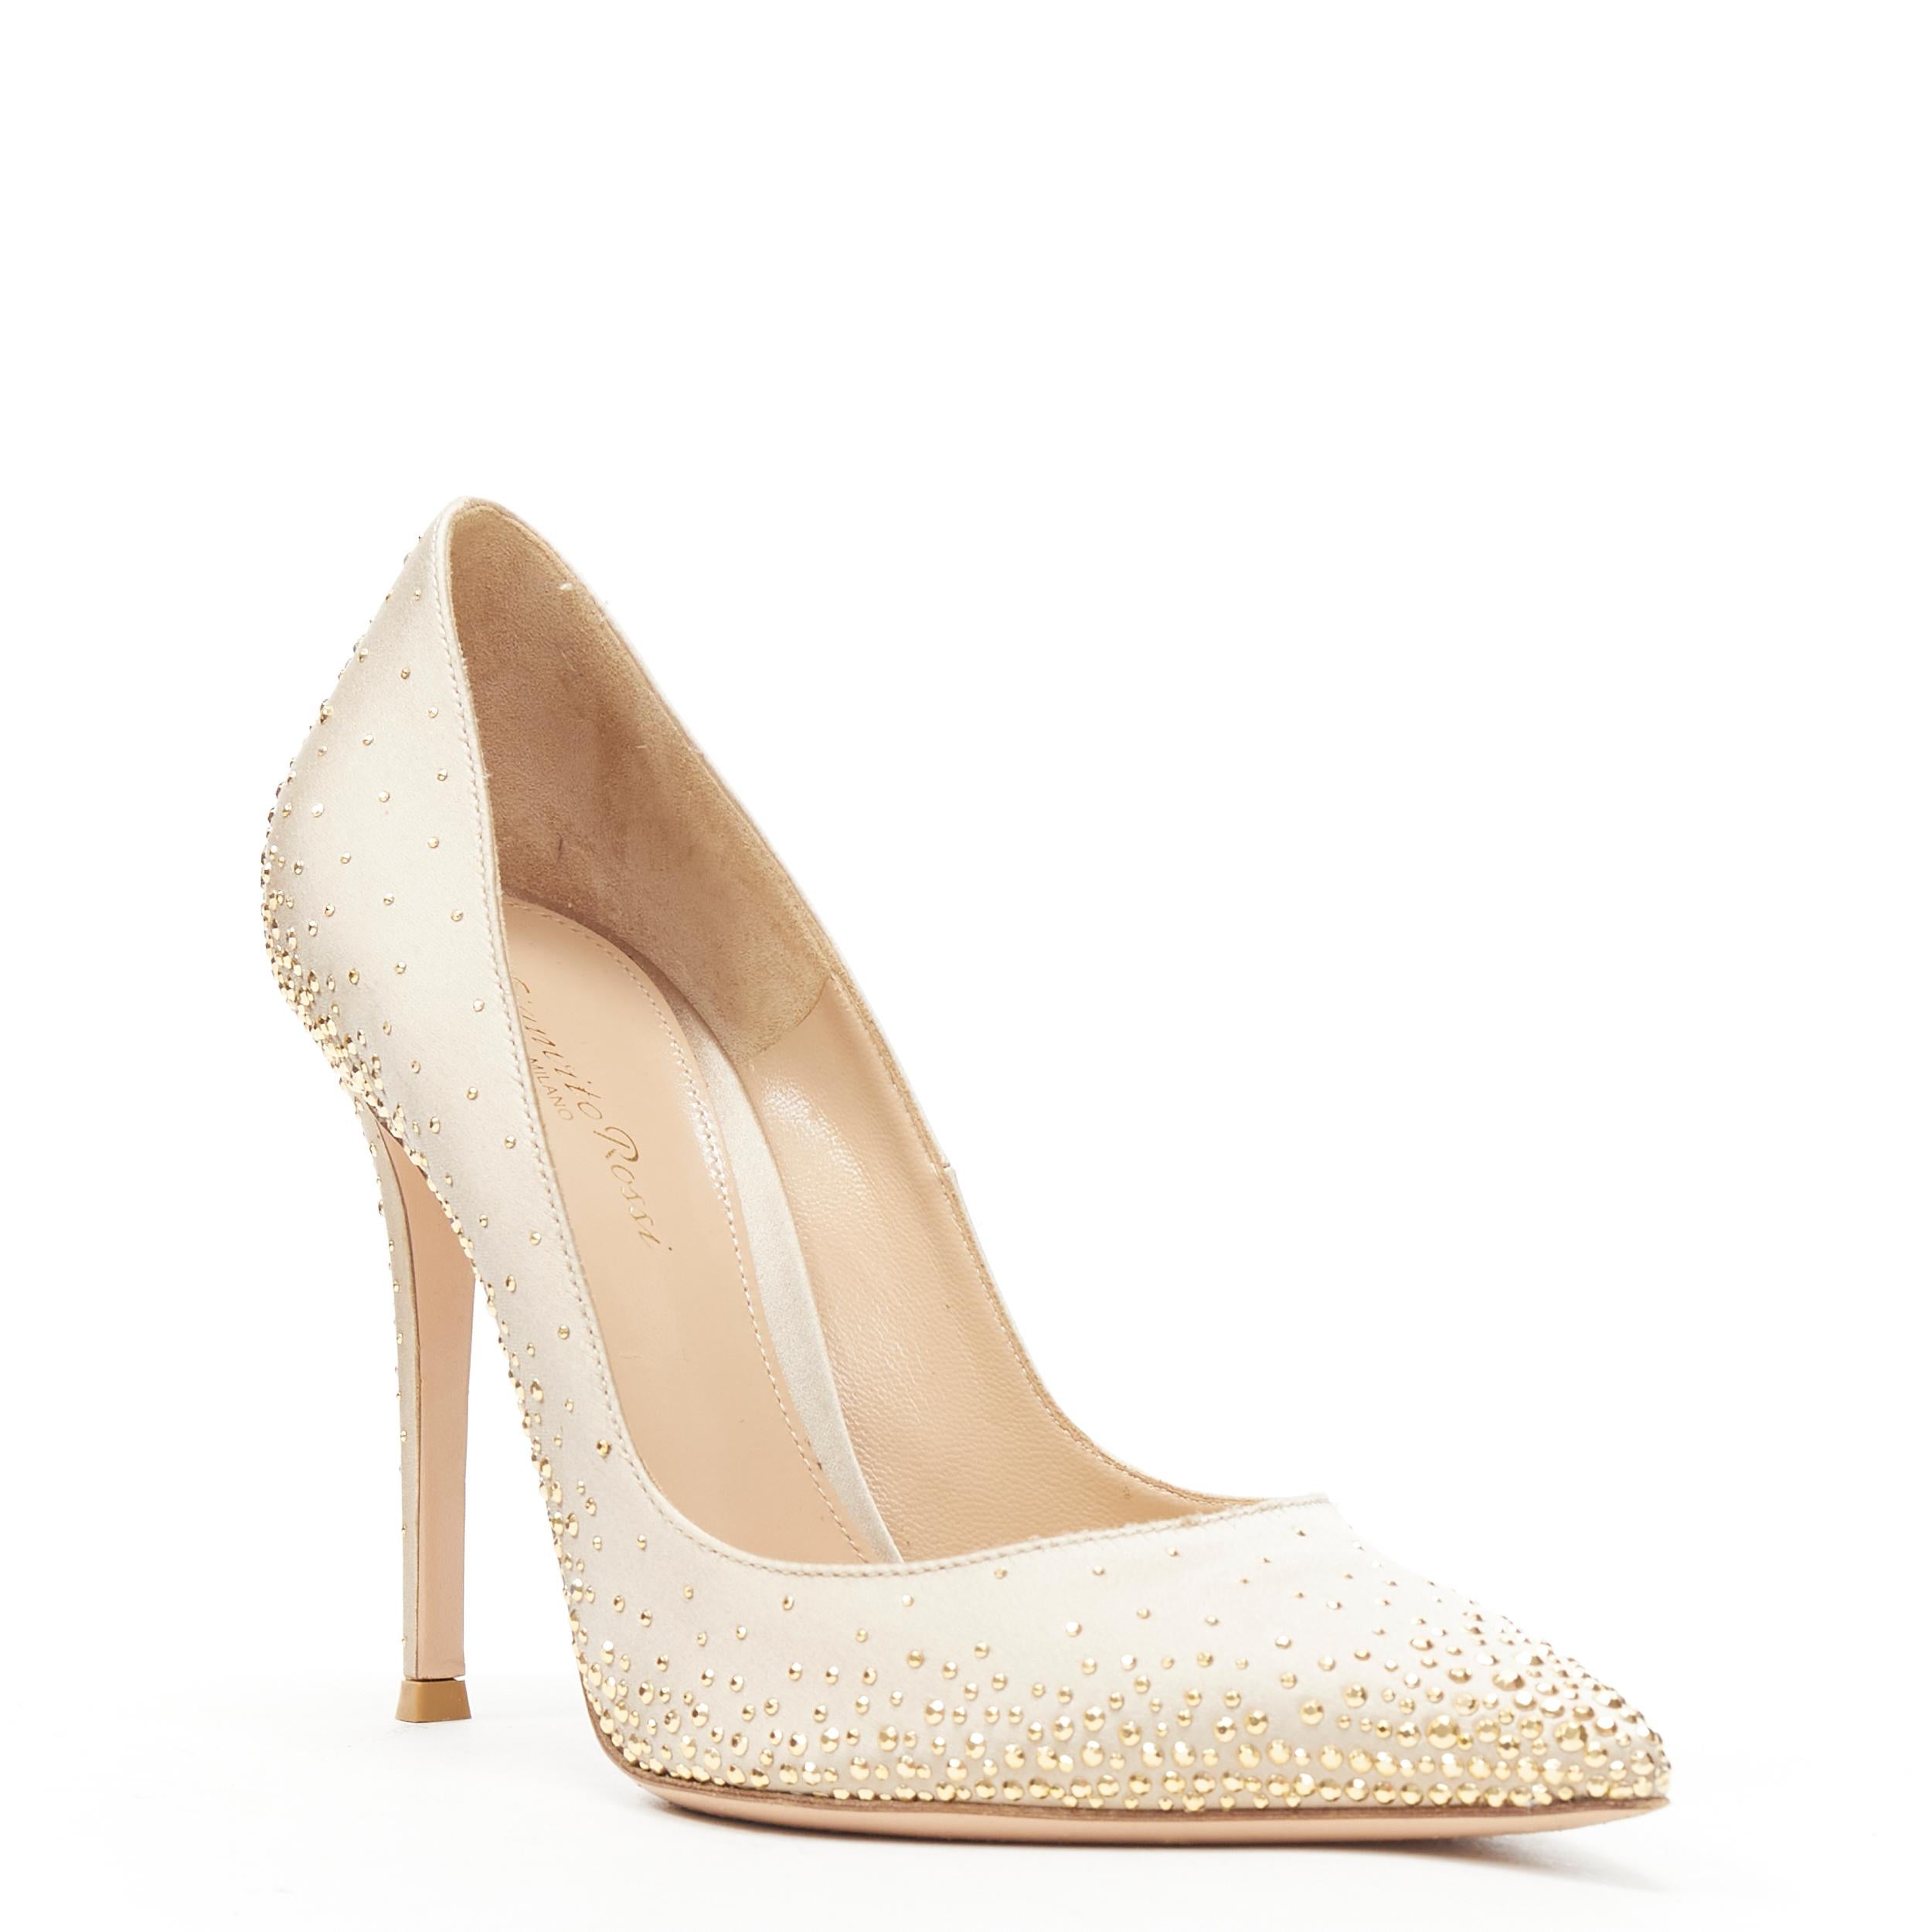 GIANIVITO ROSSI champagne gold satin silk gold studded pigalle pump heel EU39 
Reference: TGAS/B01042 
Brand: Gianvito Rossi 
Designer: Gianvito Rossi 
Model: Studded satin pump 
Material: Silk Color: Gold Pattern: Solid 
Extra Detail: Champagne